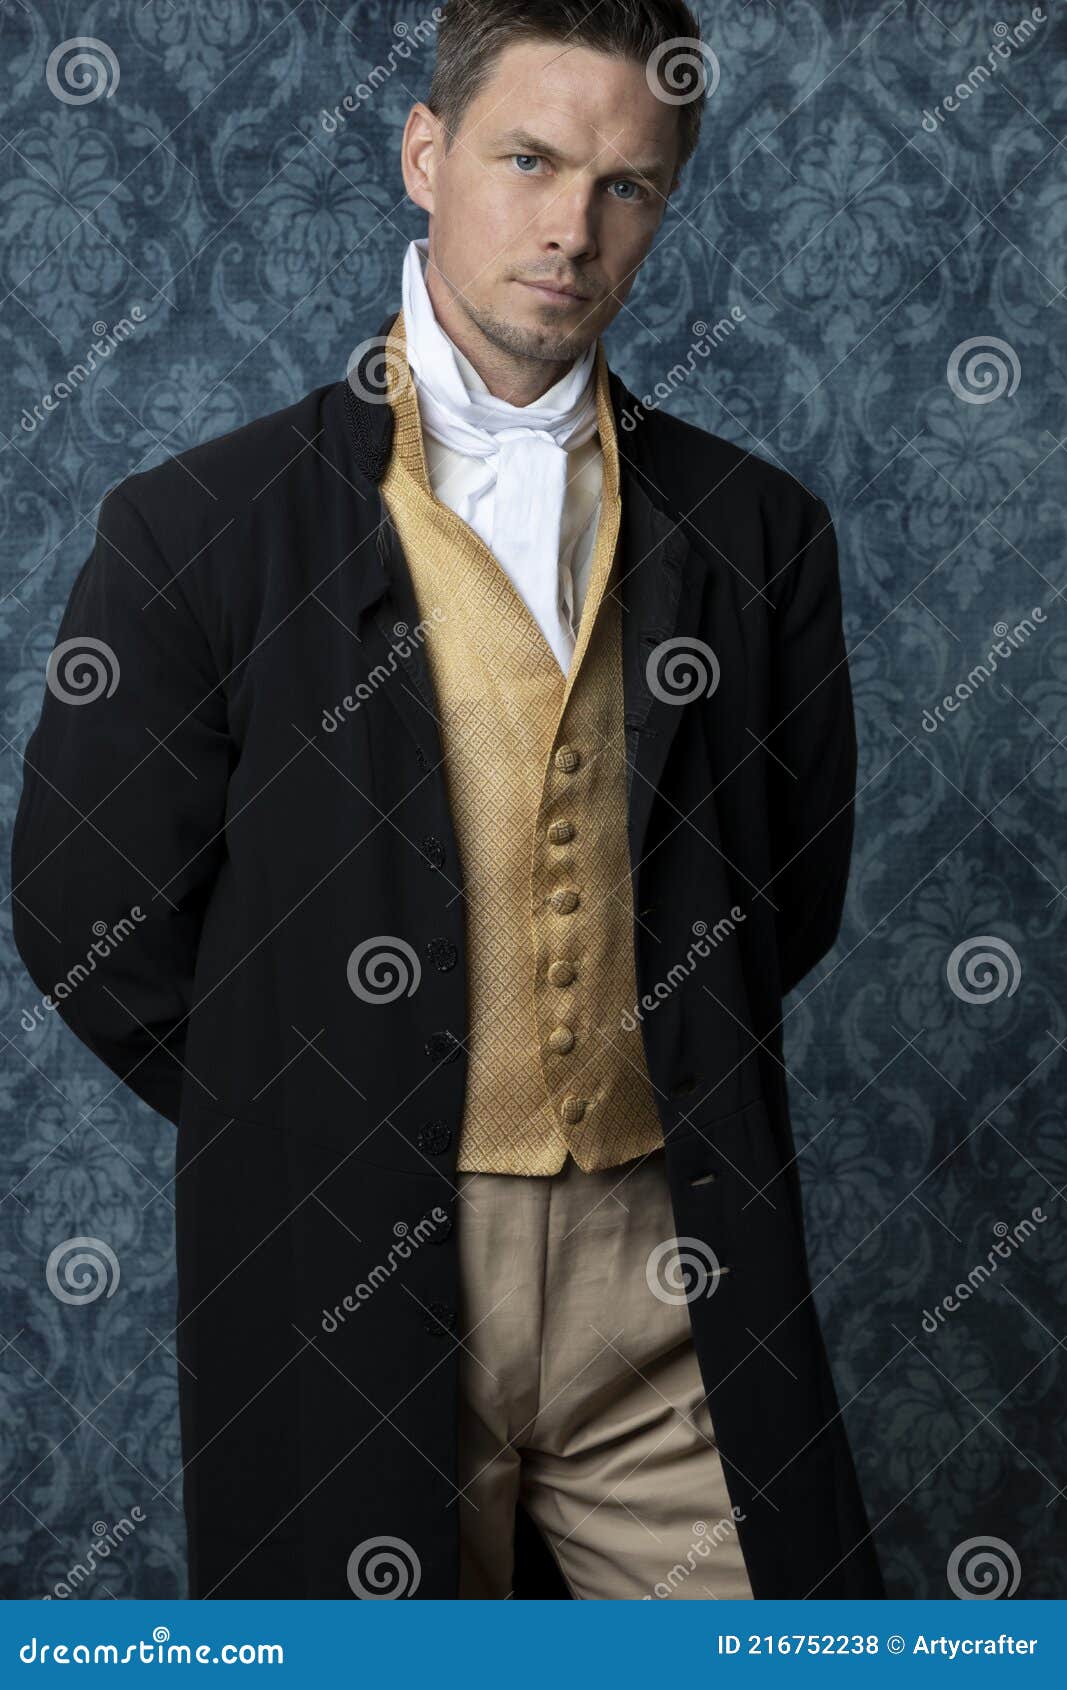 a handsome regency gentleman wearing a gold waistcoat, breeches, and a black coat